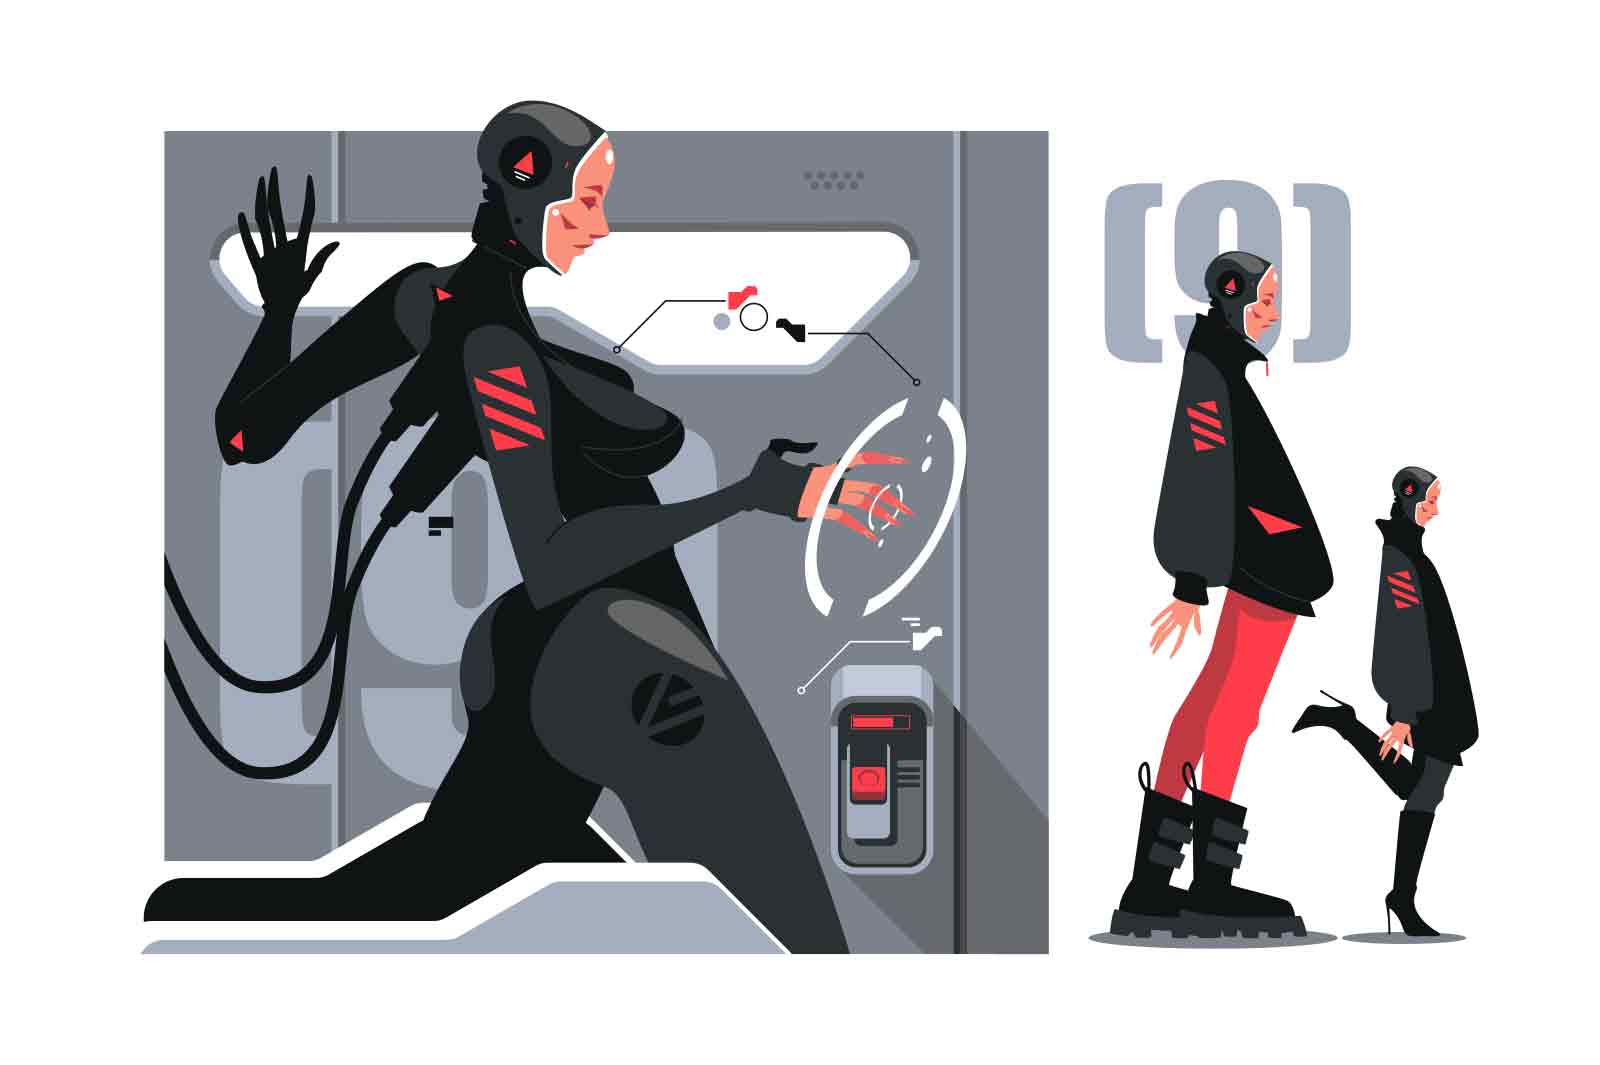 Futuristic cyborg woman wakes up from hyper-sleep, vector illustration. She is connected by wires and interacts with interface.